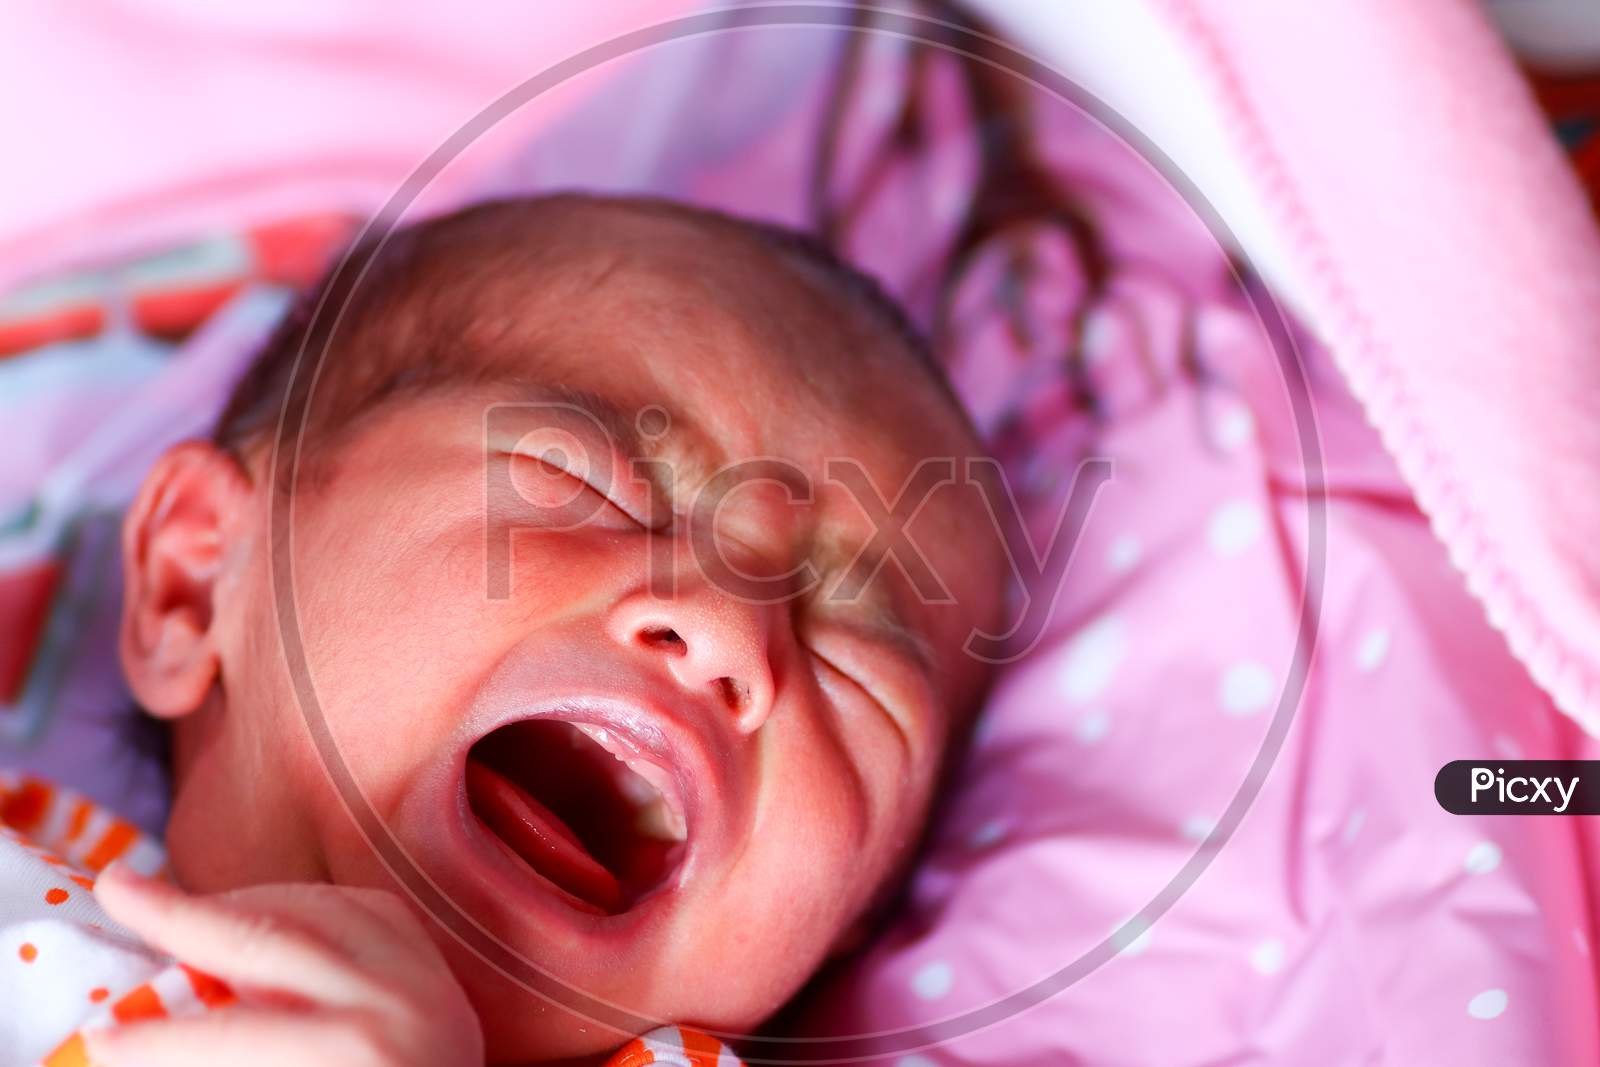 A Newborn Asian Baby Crying With Open Mouth And Closed Eyes